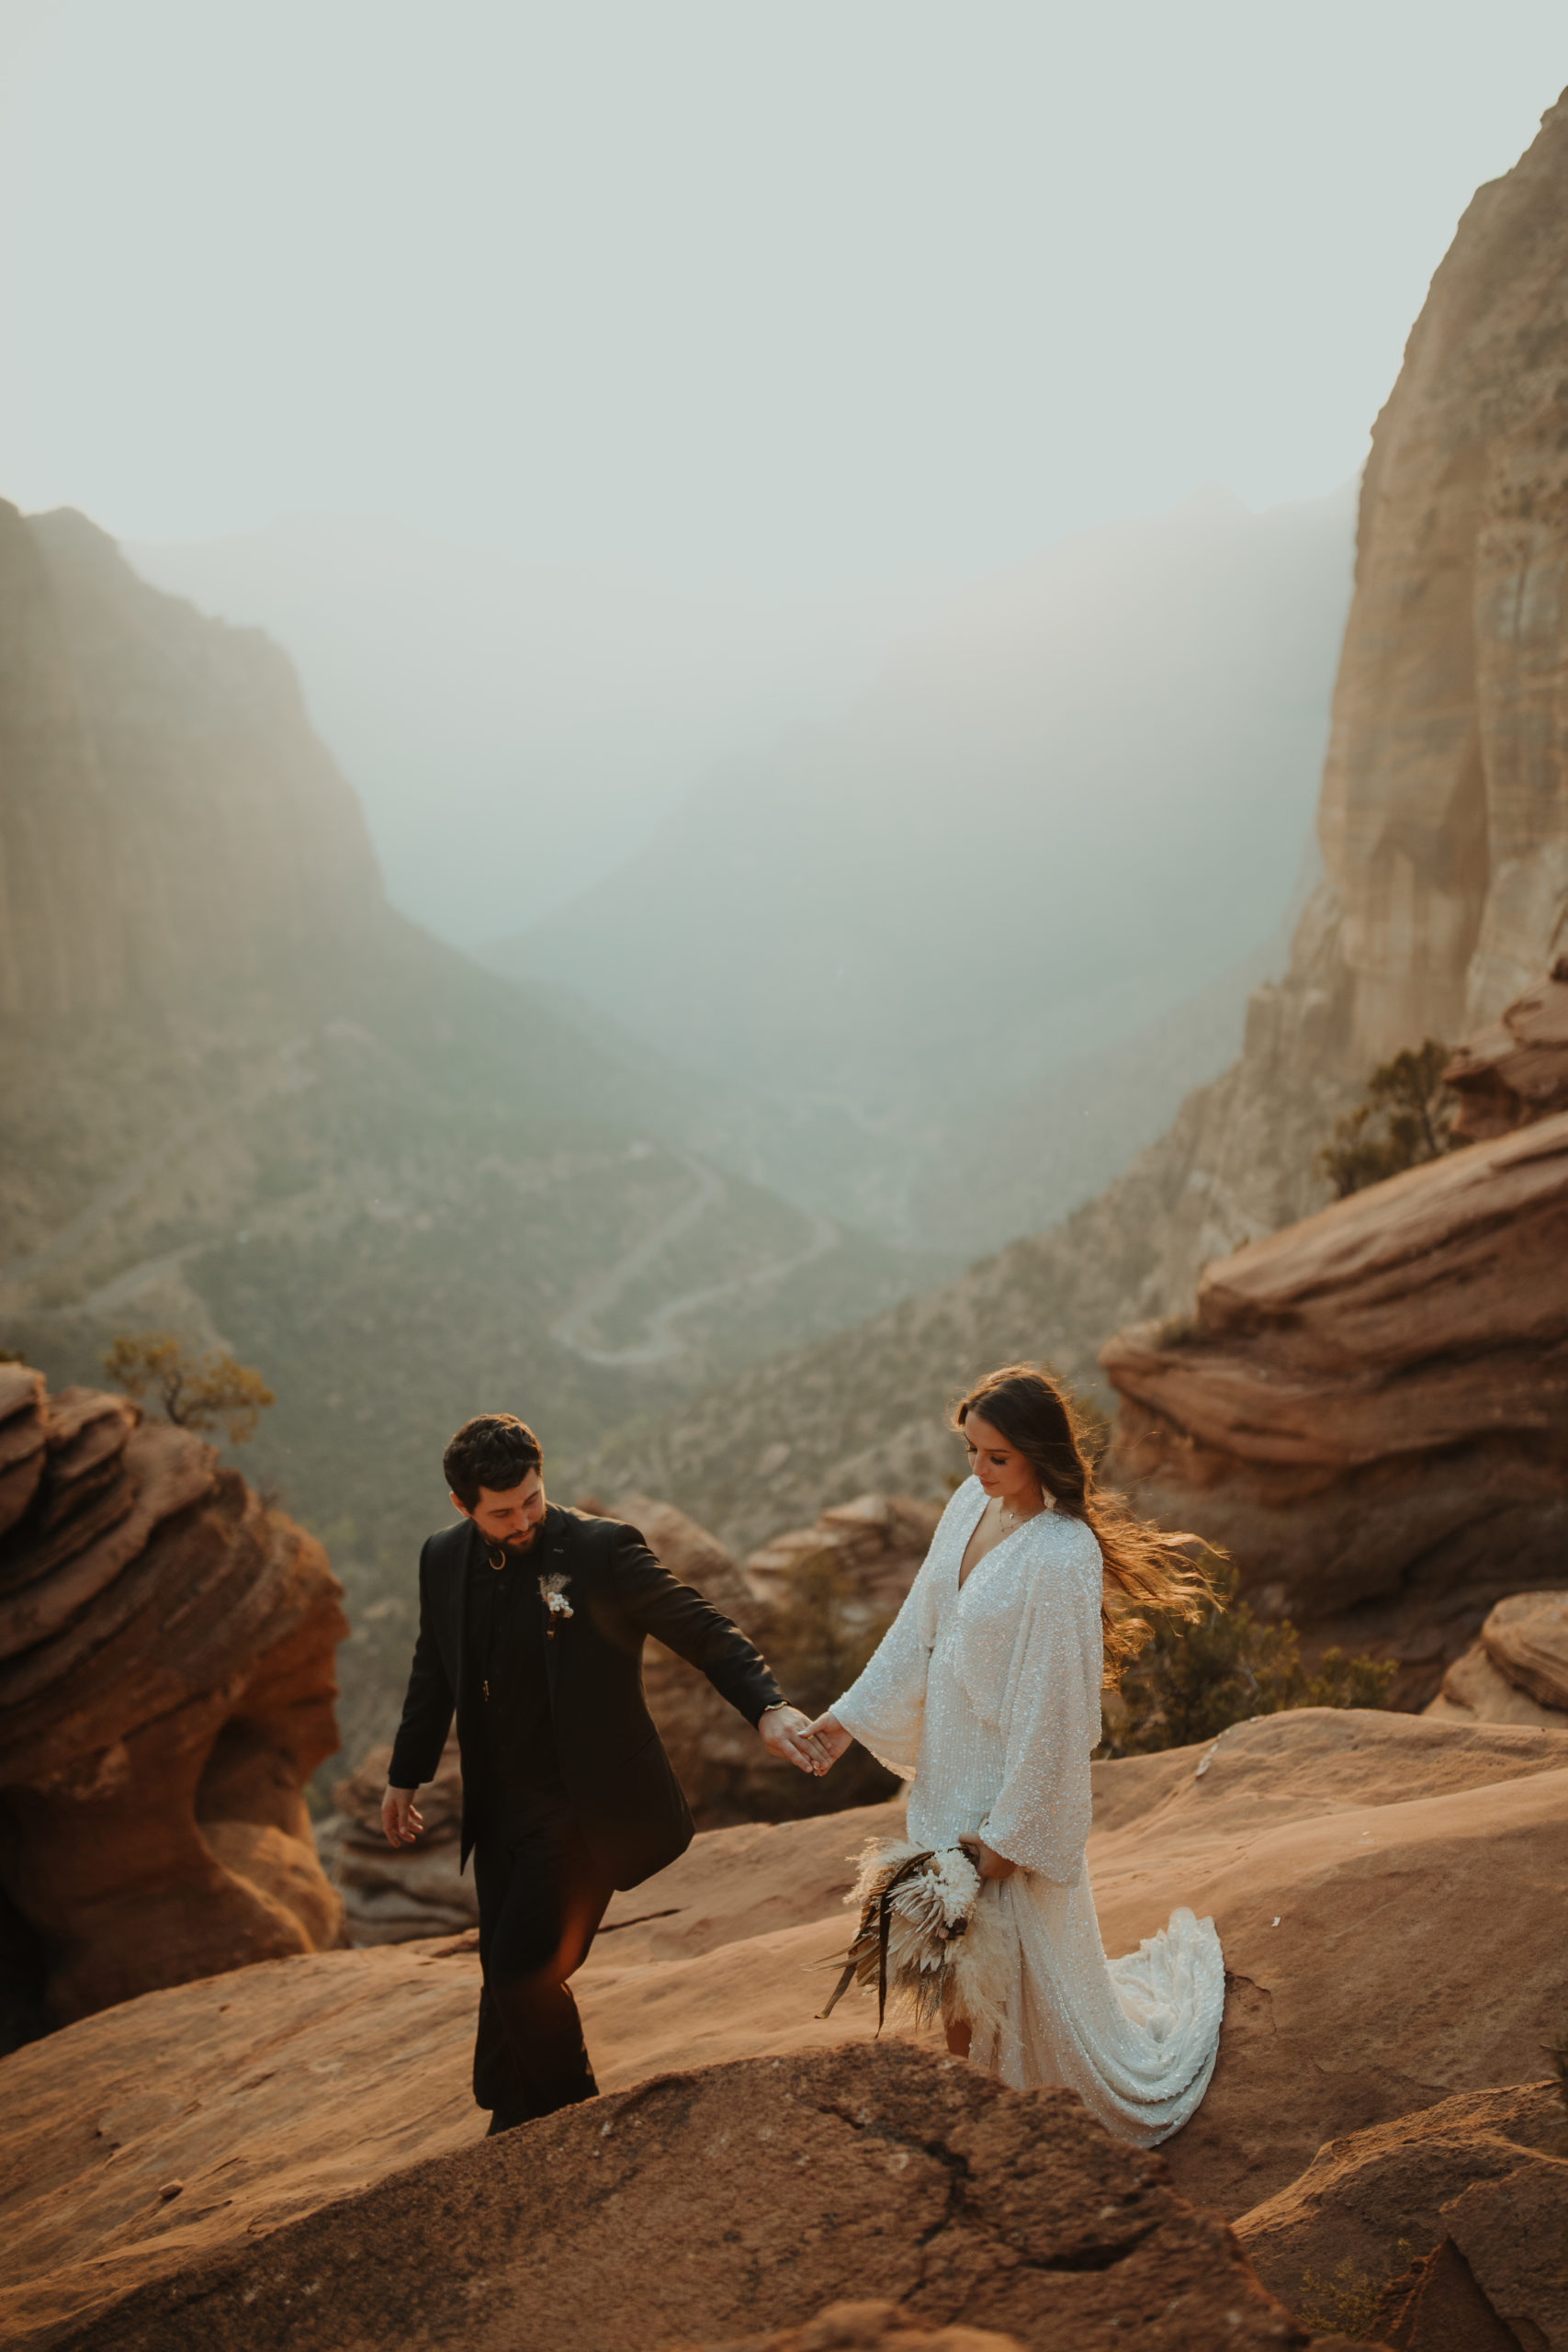 Desert boho couple walking away from cliff with sunset behind them